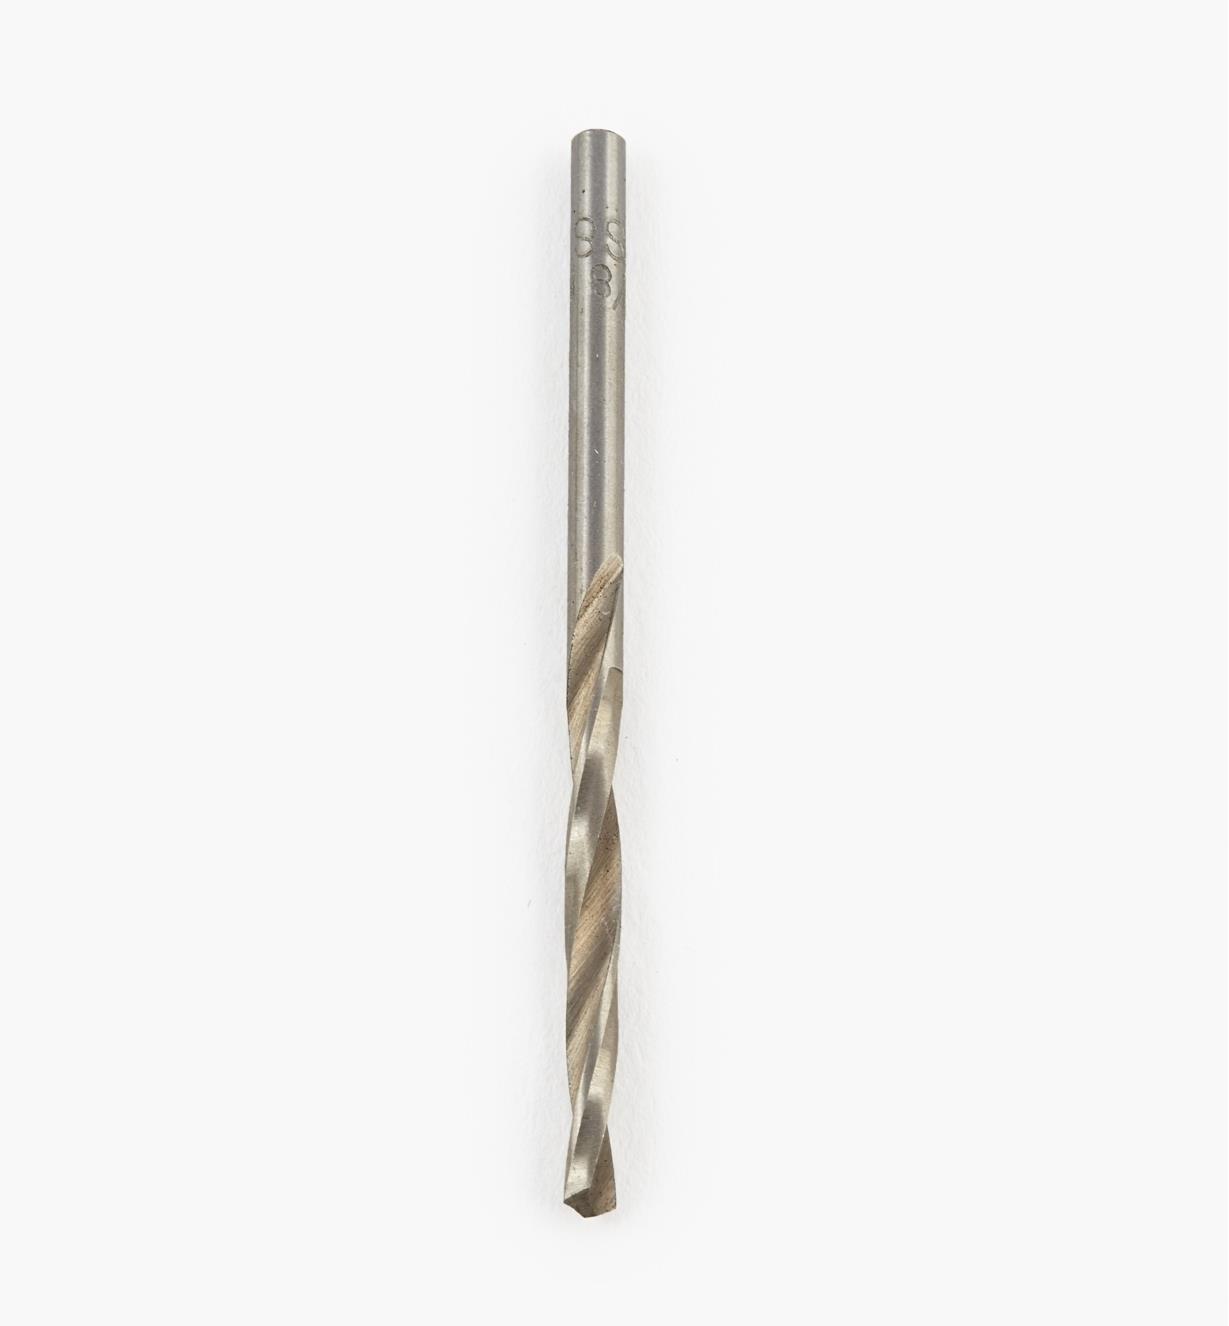 66J4036 - Repl. 1/8" Bit for #8 Carbide Countersink Drill Unit with Low-Friction Depth Stop